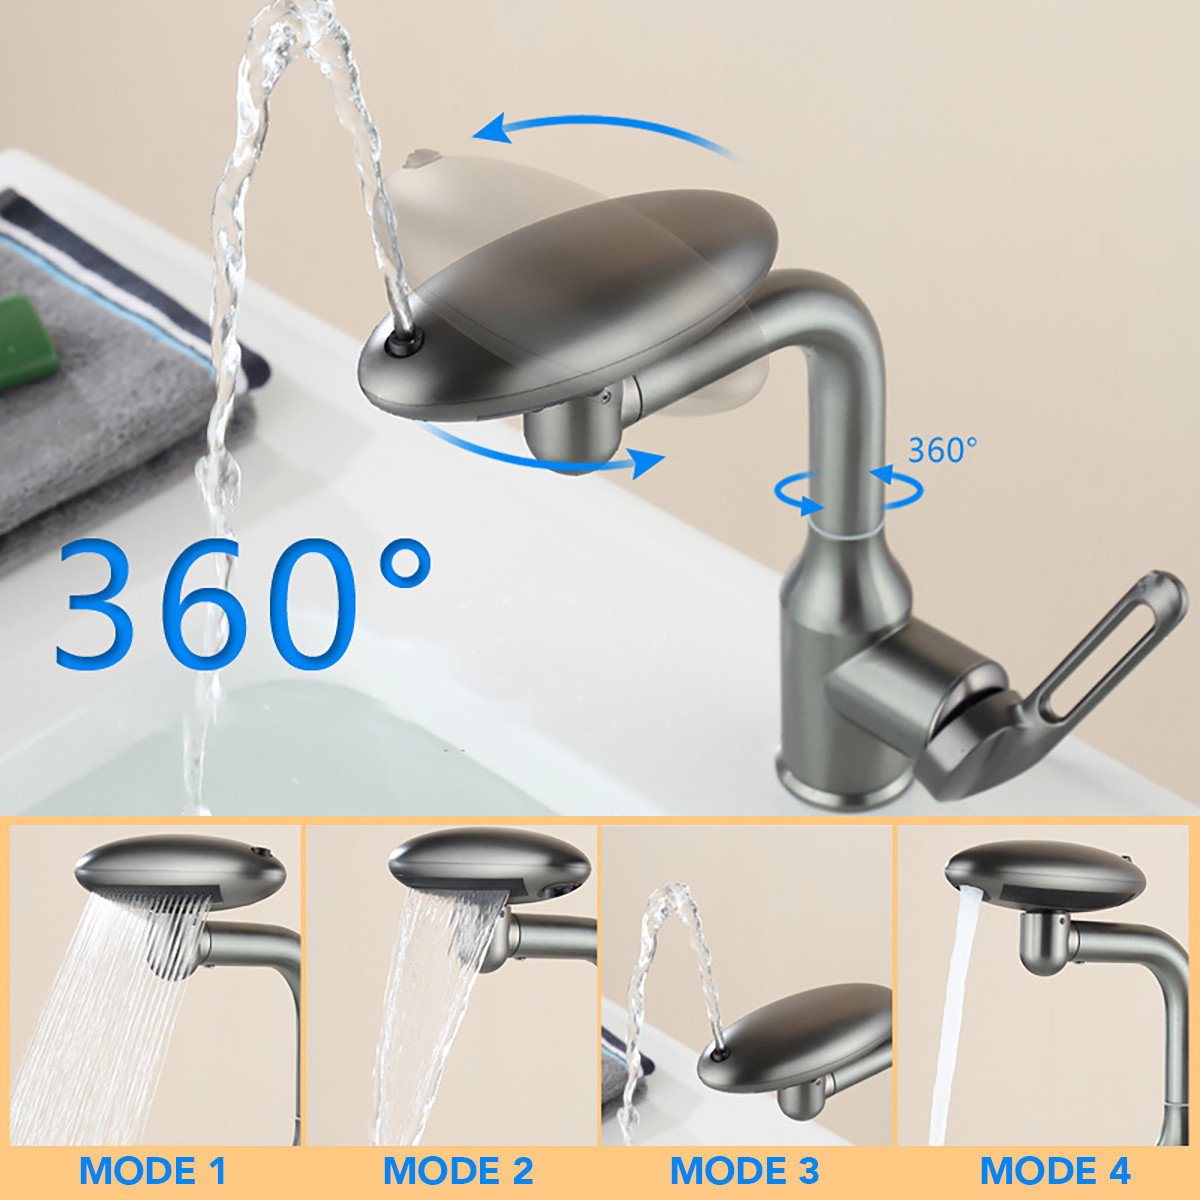 Multi-Function Rotate Spray Filtration Faucet with 4 Water Outlet Mode